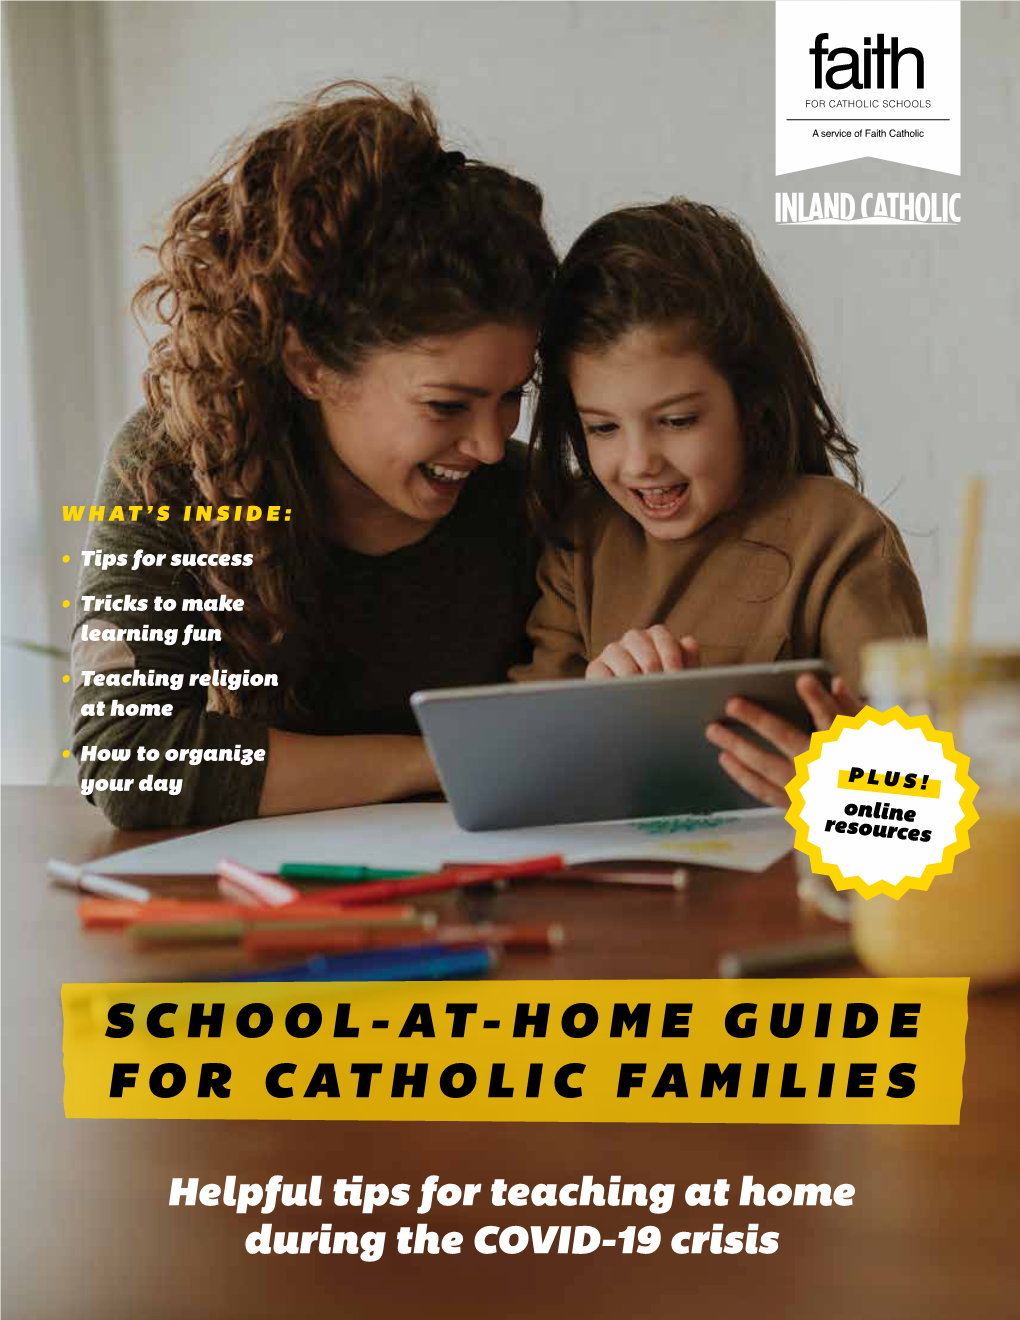 School-At-Home Guide for Catholic Families